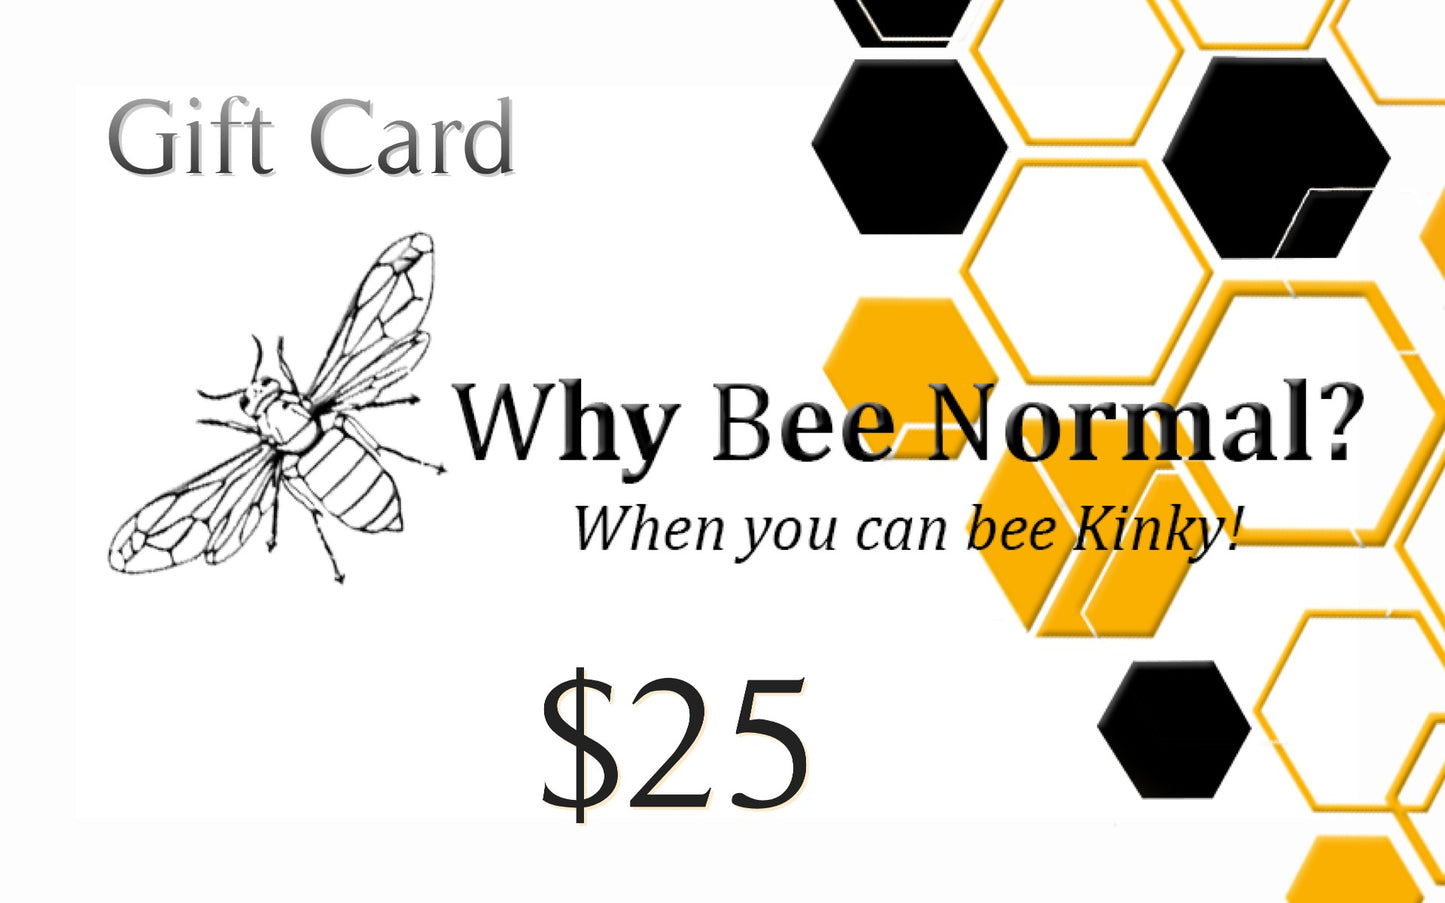 Gift Card for Why Bee Normal